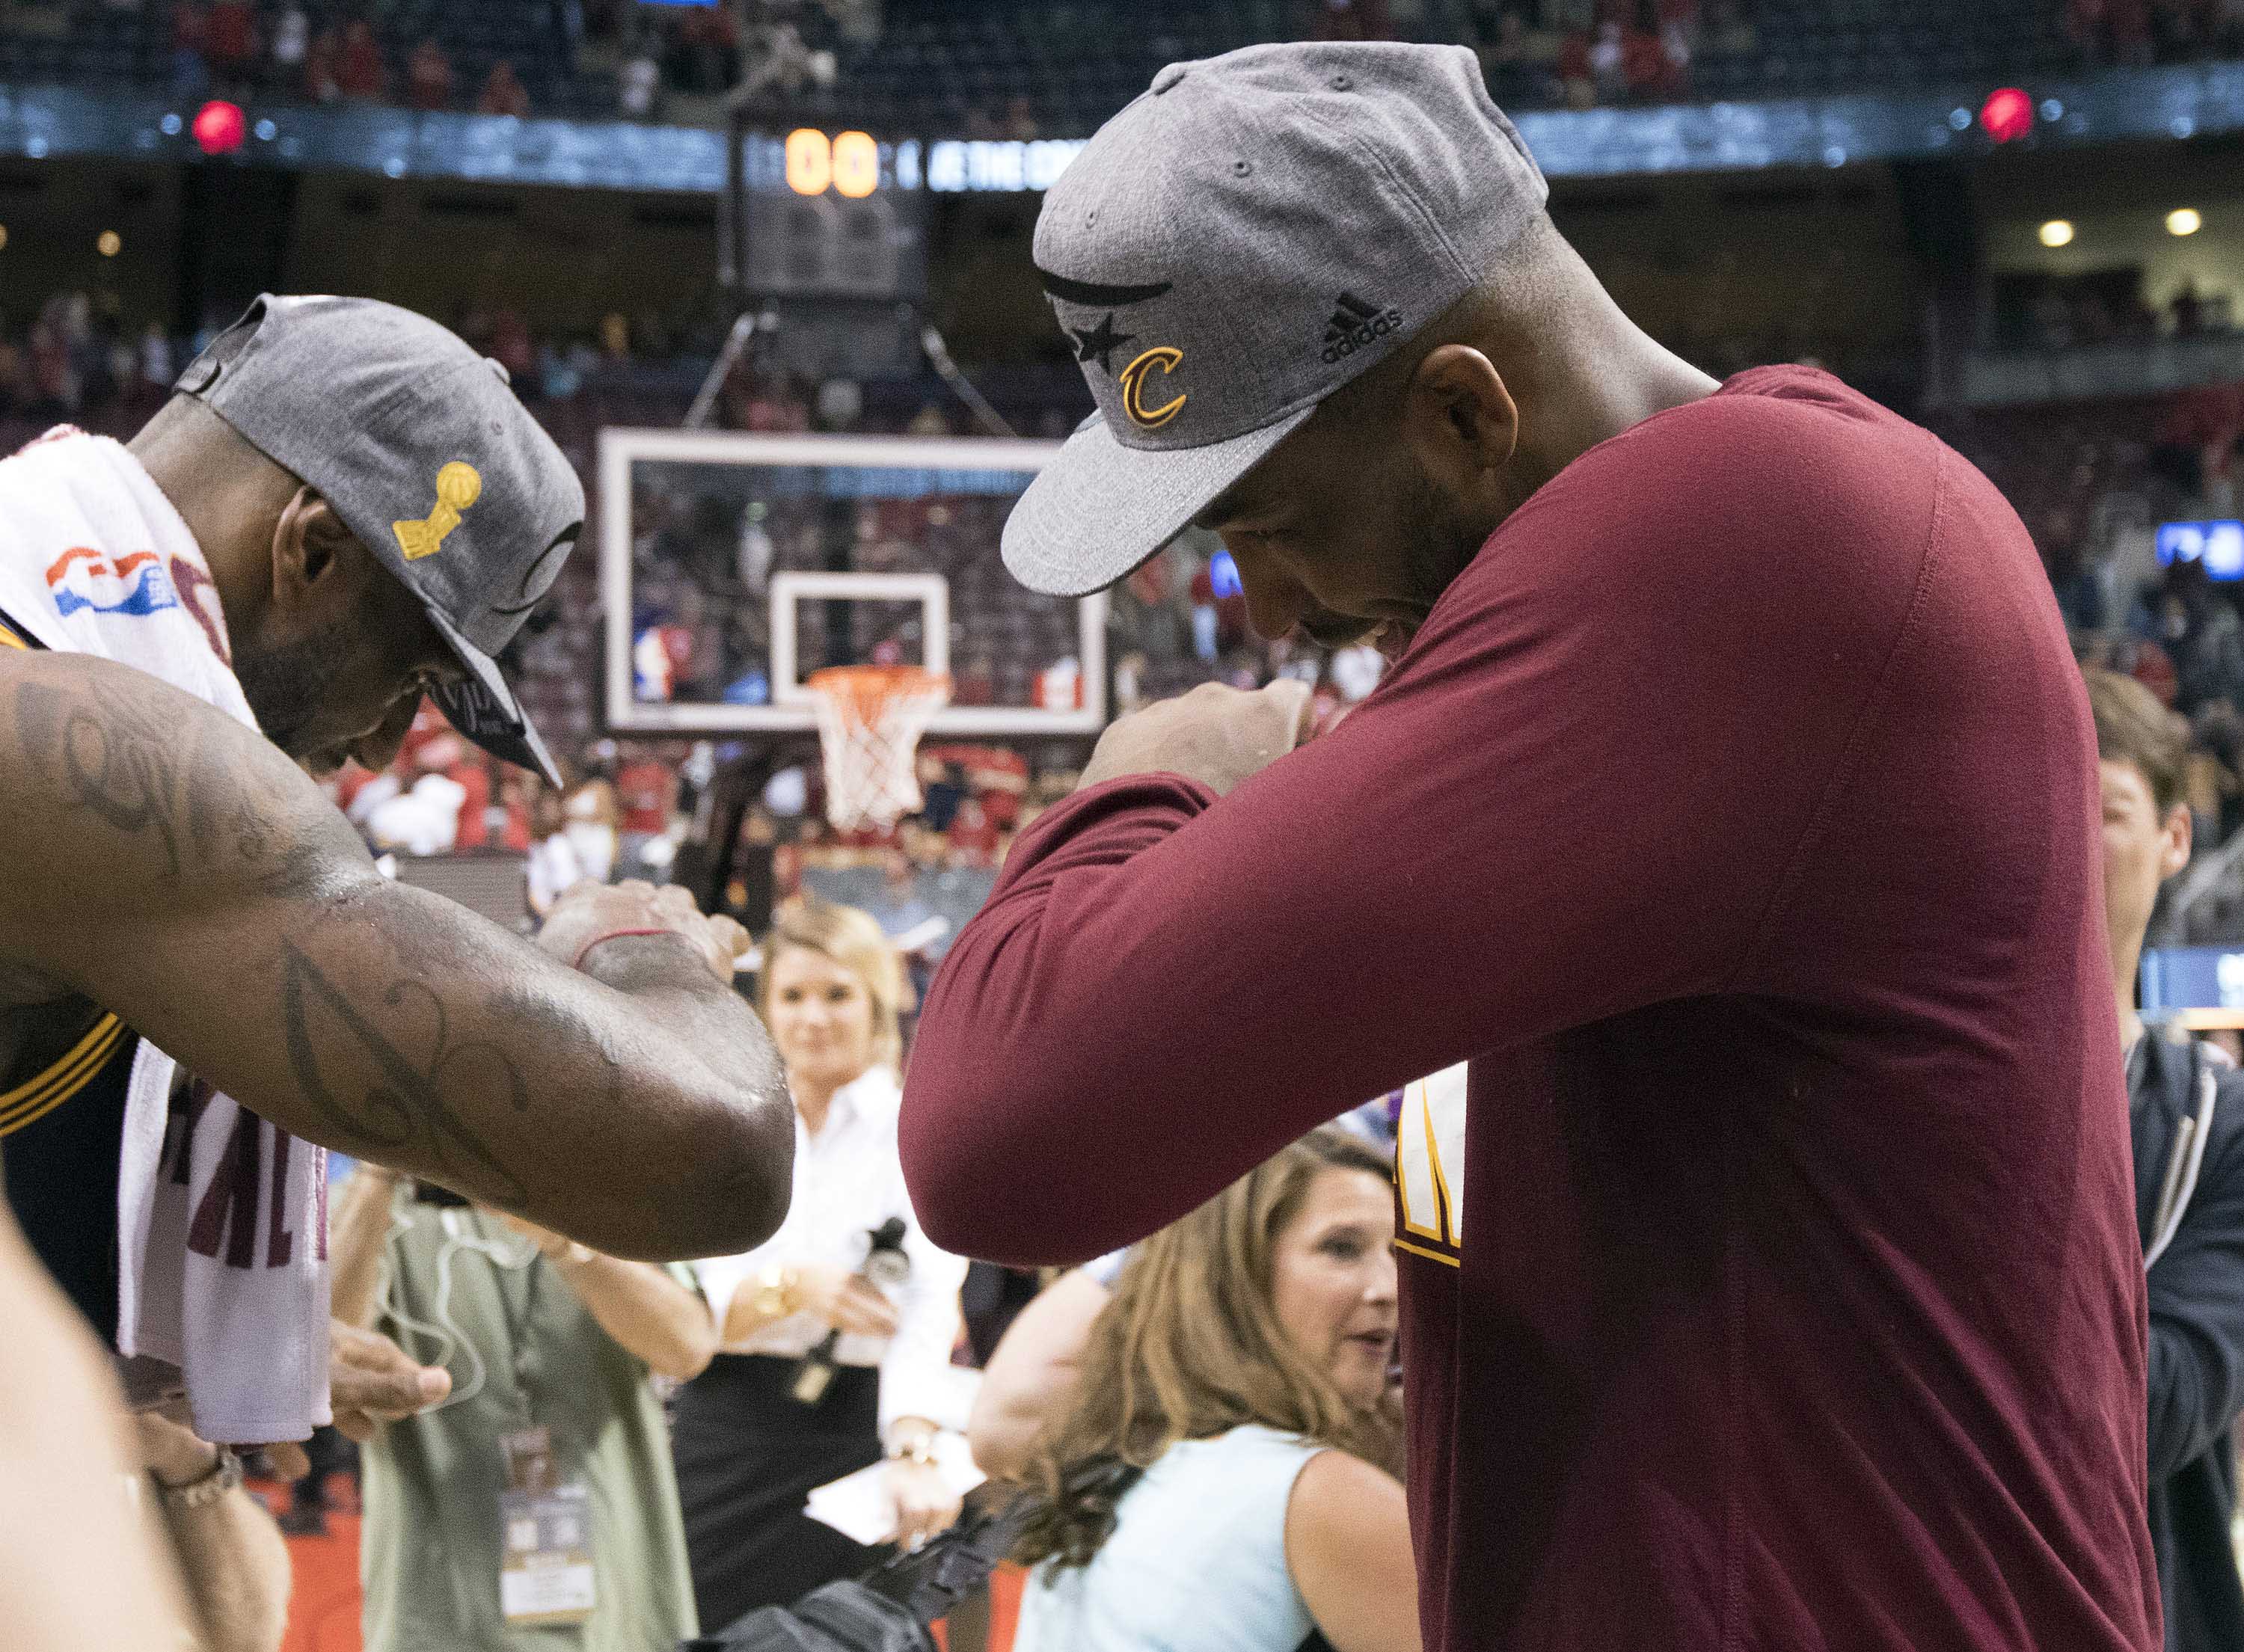 May 27, 2016; Toronto, Ontario, CAN; Cleveland Cavaliers forward LeBron James (23) celebrates the win with Cleveland Cavaliers forward Channing Frye (9) at the end of game six of the Eastern conference finals of the NBA Playoffs against theToronto Raptors at Air Canada Centre. The Cleveland Cavaliers won 113-87. Mandatory Credit: Nick Turchiaro-USA TODAY Sports ORG XMIT: USATSI-269278 ORIG FILE ID: 20160527_pjc_bt2_195.JPG